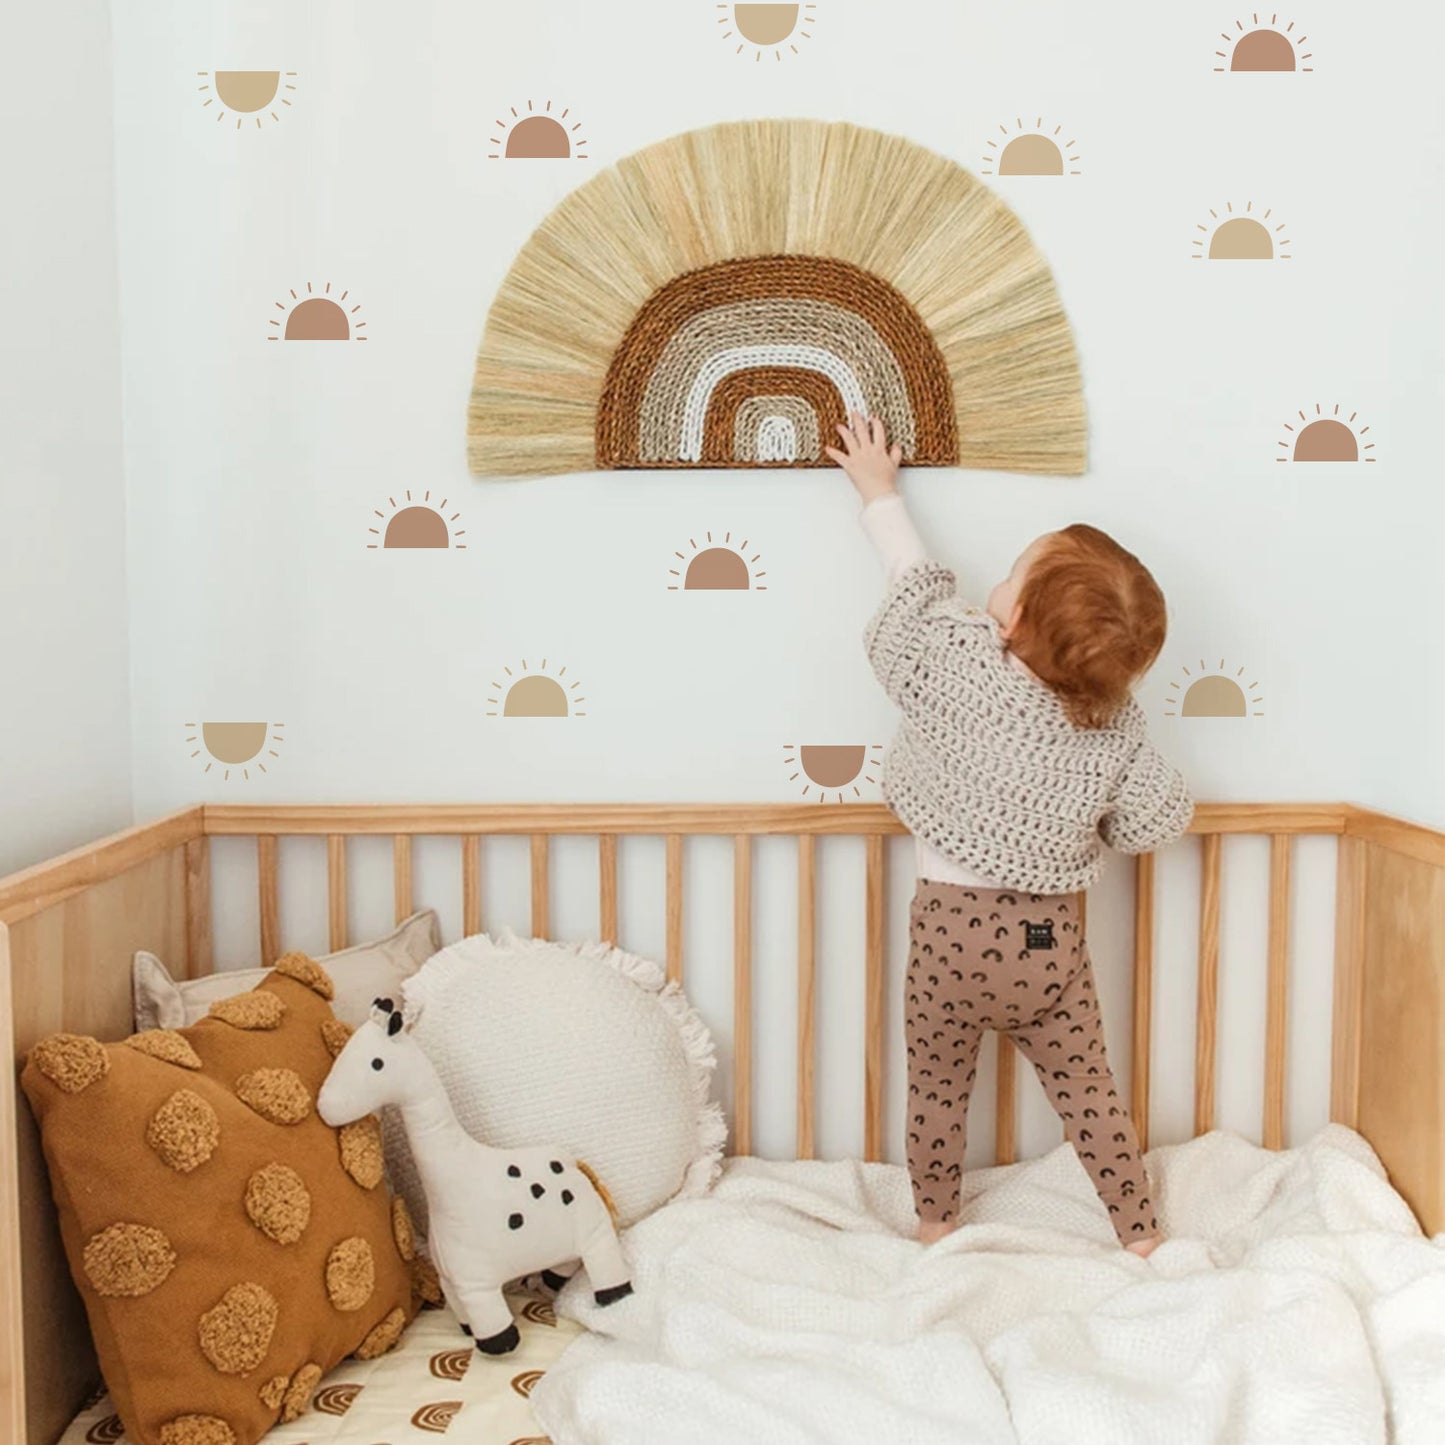 Self-adhesive Children's Room Bed Stickers